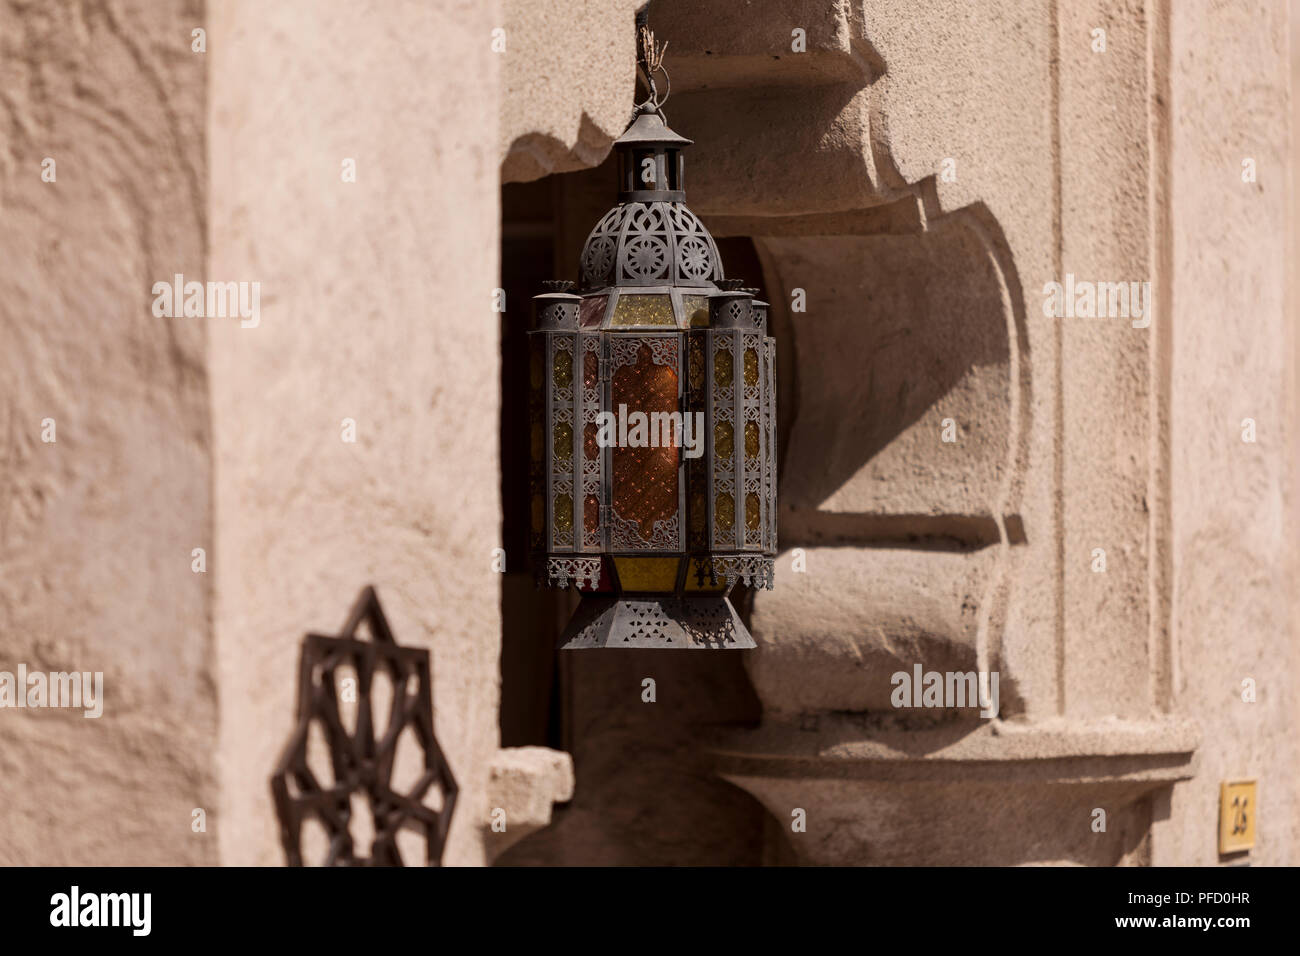 Lantern at the entrance to the Sheikh Mohammed Centre for Cultural Understanding, in the Al Fahidi Historical Neighbourhood, Dubai Stock Photo